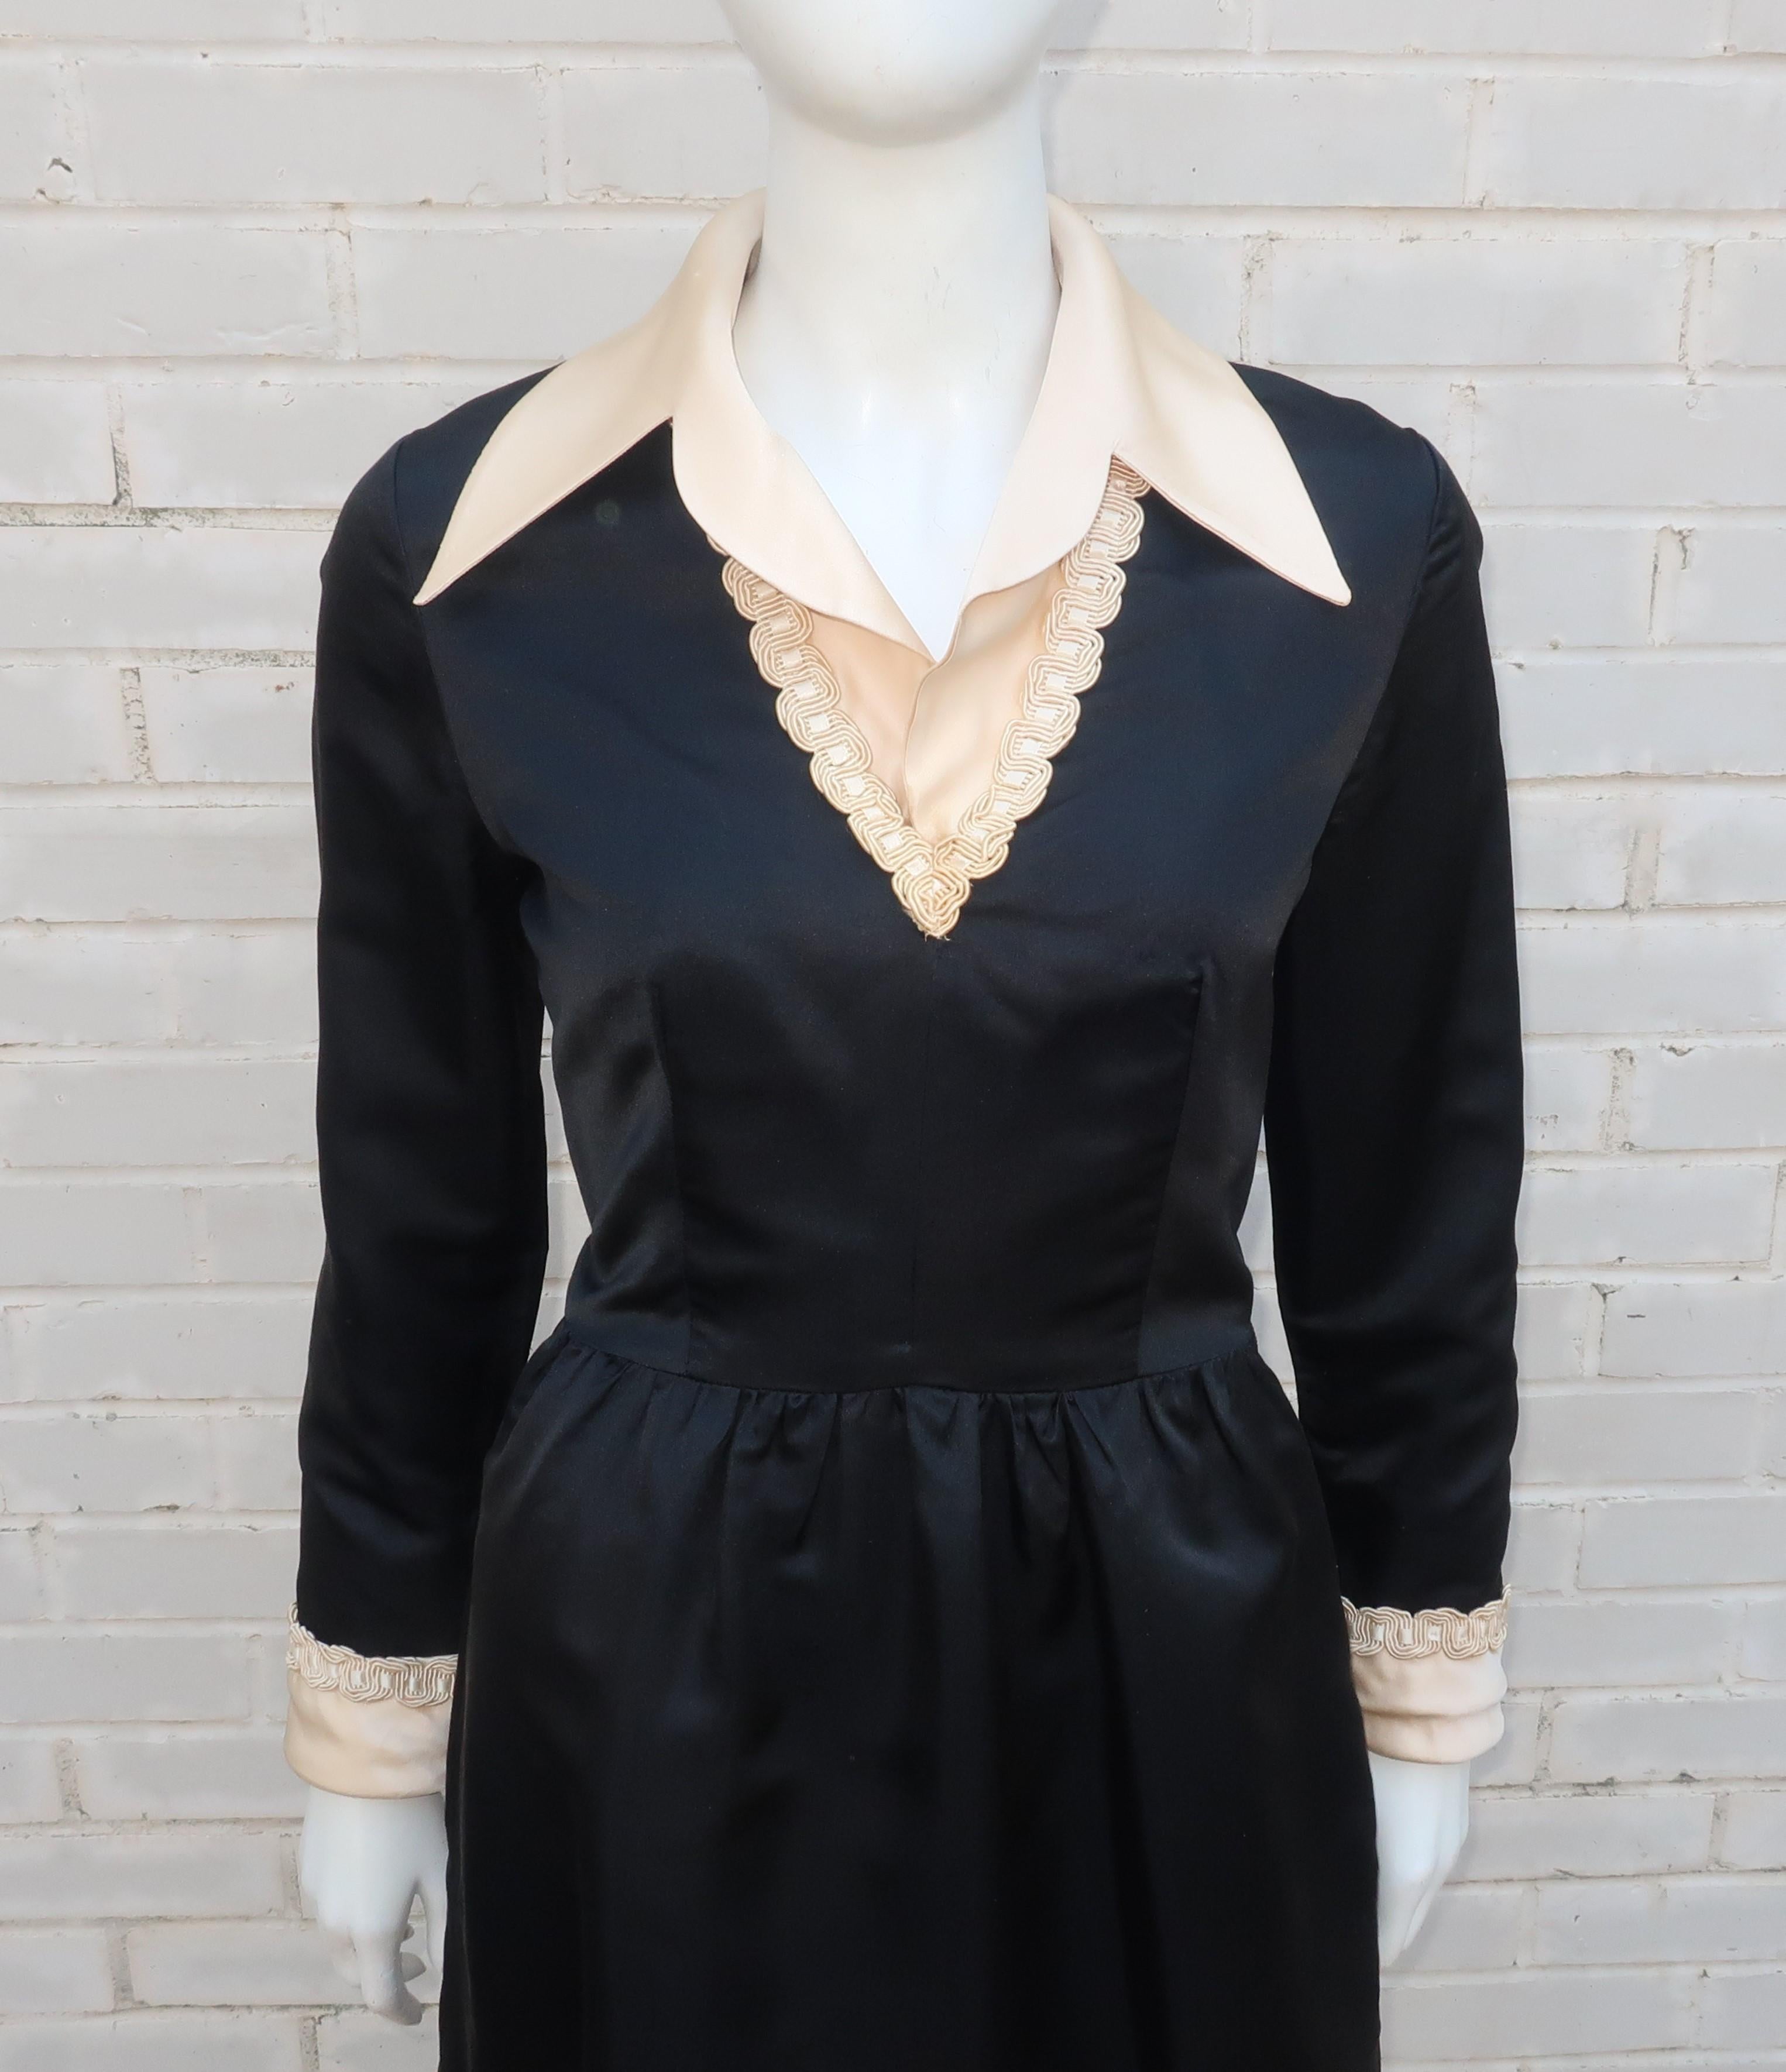 1970's Oscar de La Renta black & ivory satin cocktail dress with a demure silhouette and decidedly chic look.  The dress zips and hooks at the back with hidden side pockets and braiding at the neckline and cuffs.  The two tone design presents the